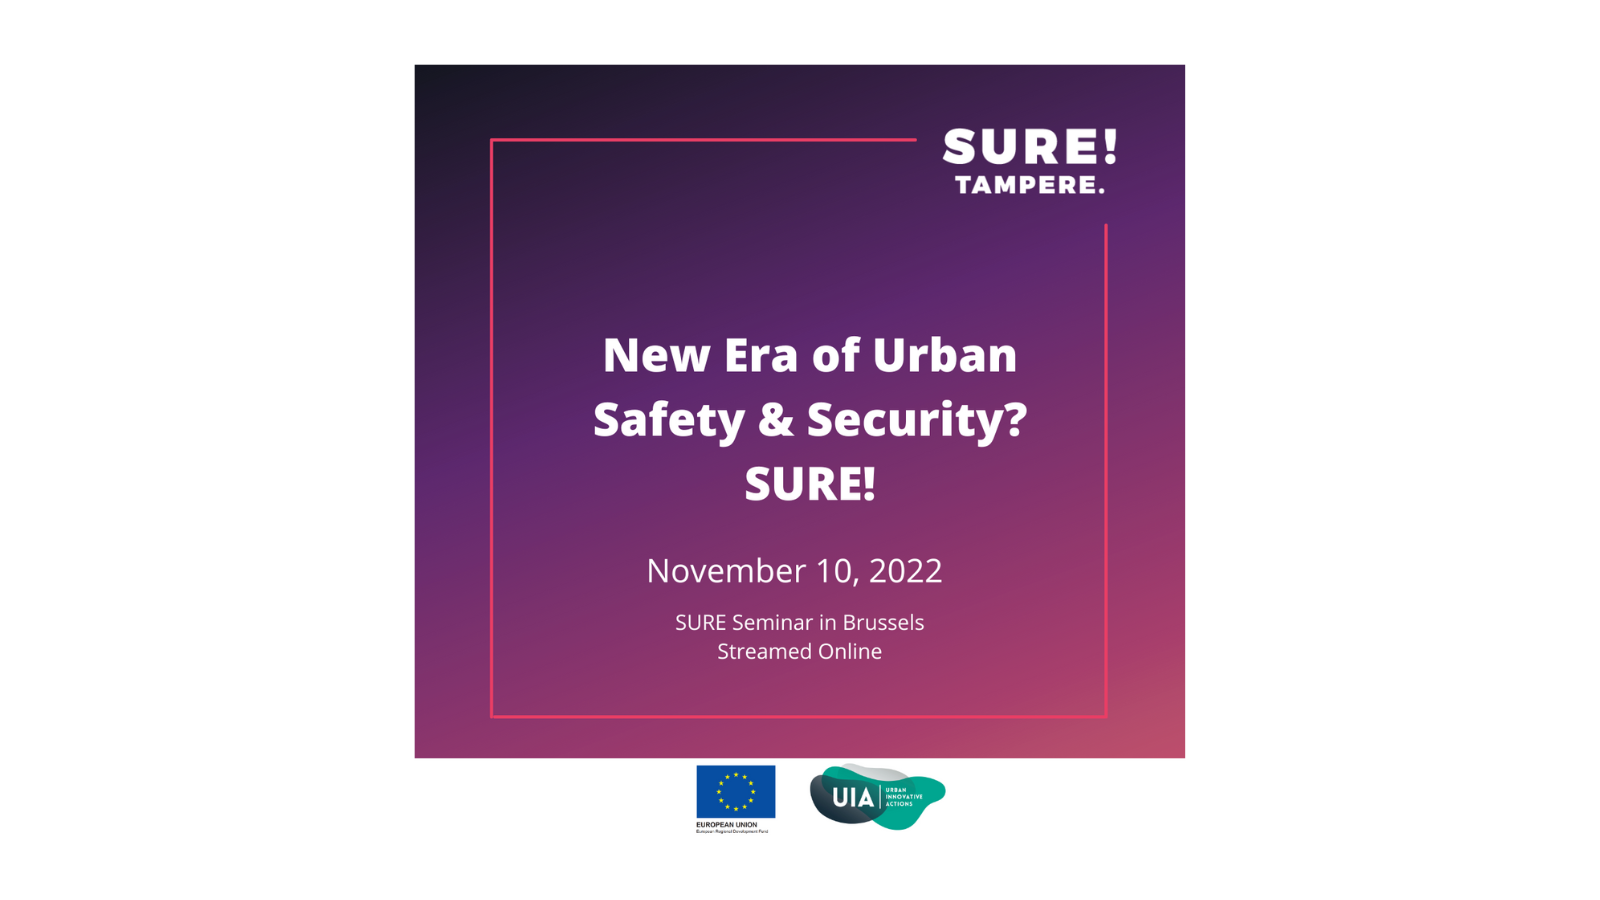 New Era of Urban Safety & Security? SURE!